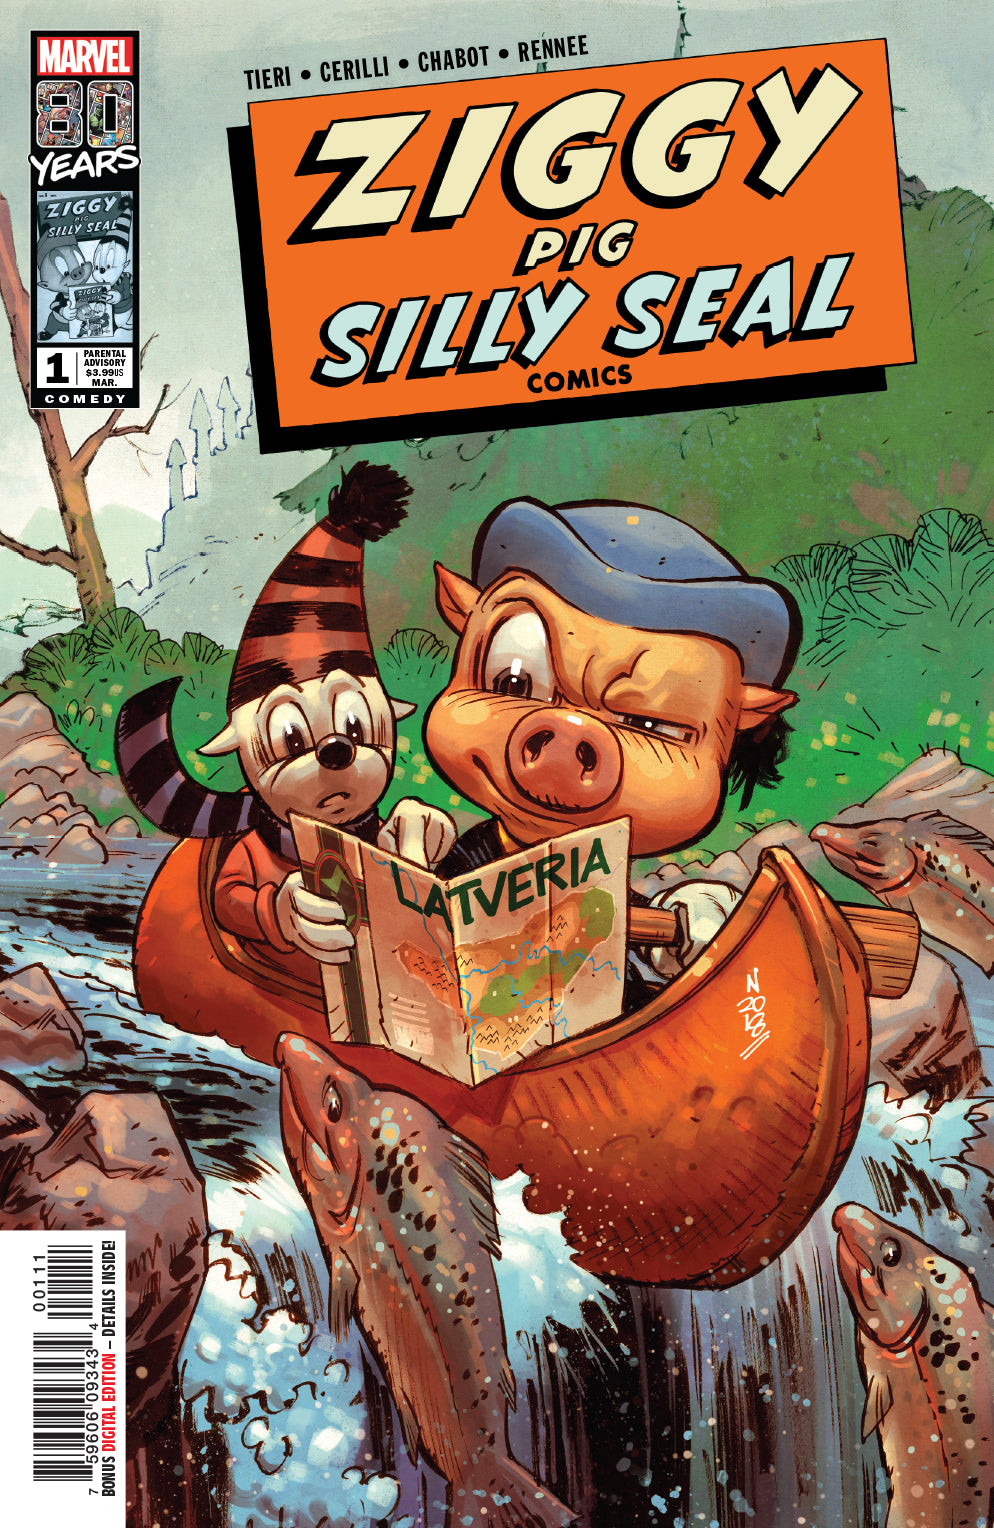 ZIGGY PIG SILLY SEAL COMICS #1 COVER